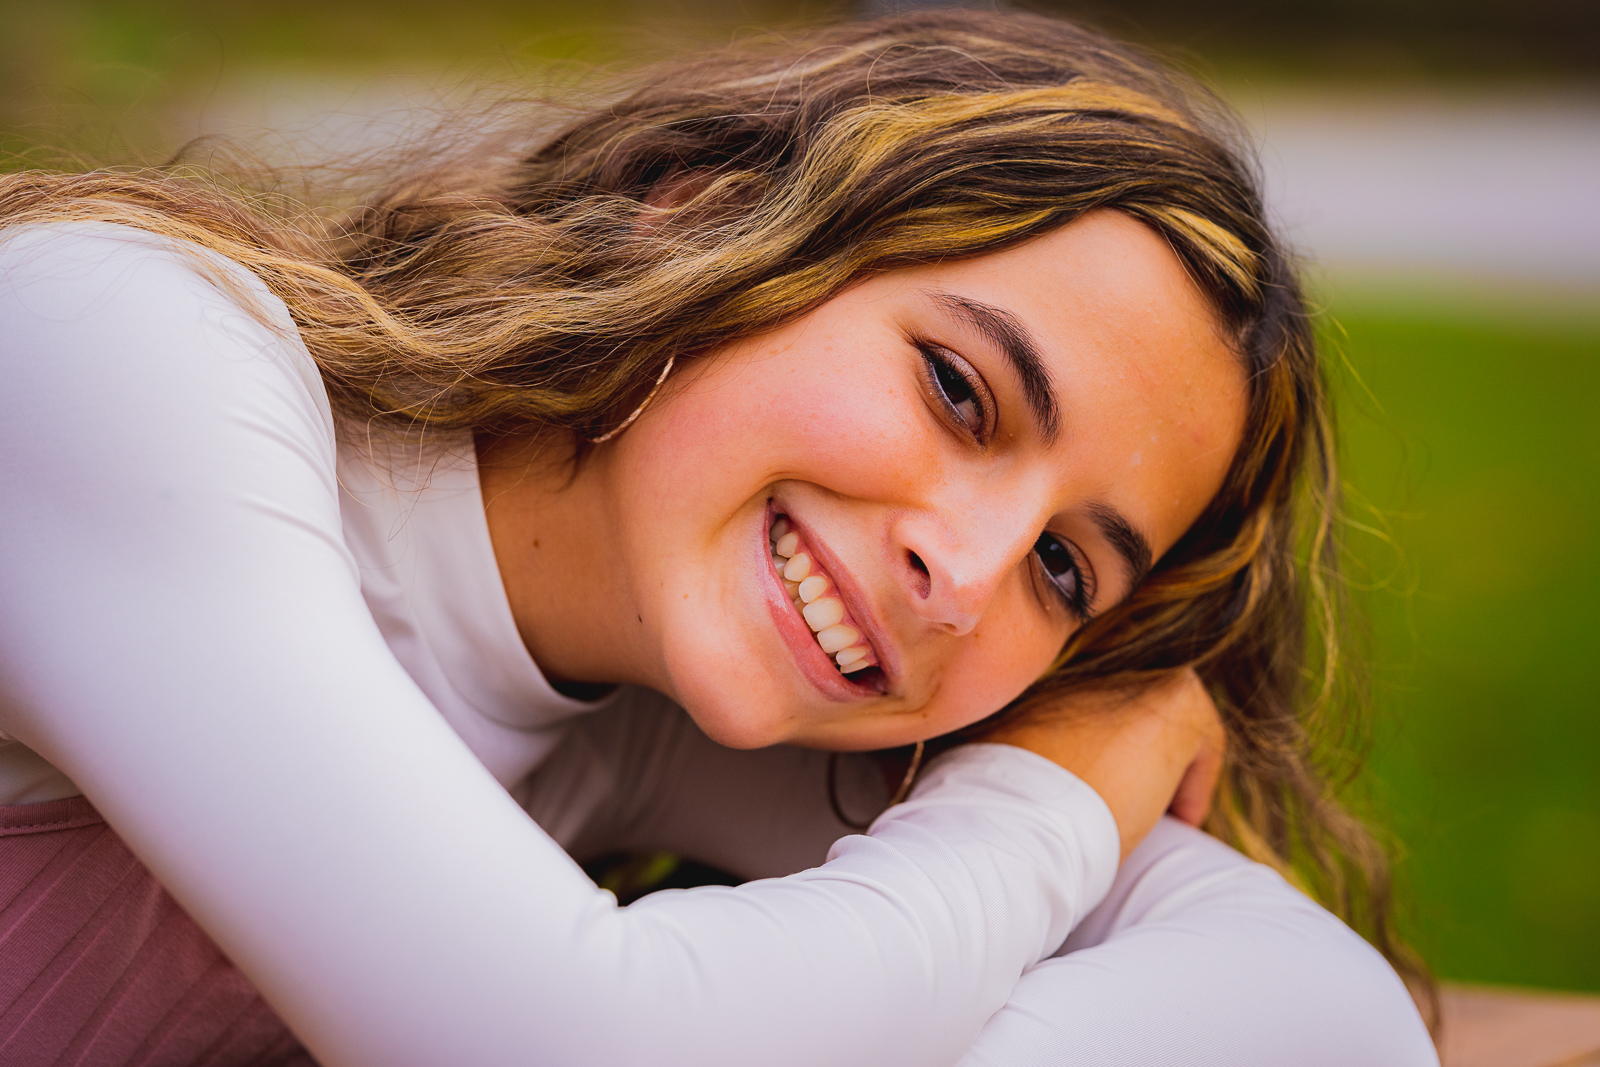 High school girl senior pictures, fall, outdoor photo session at Tinkers Creek